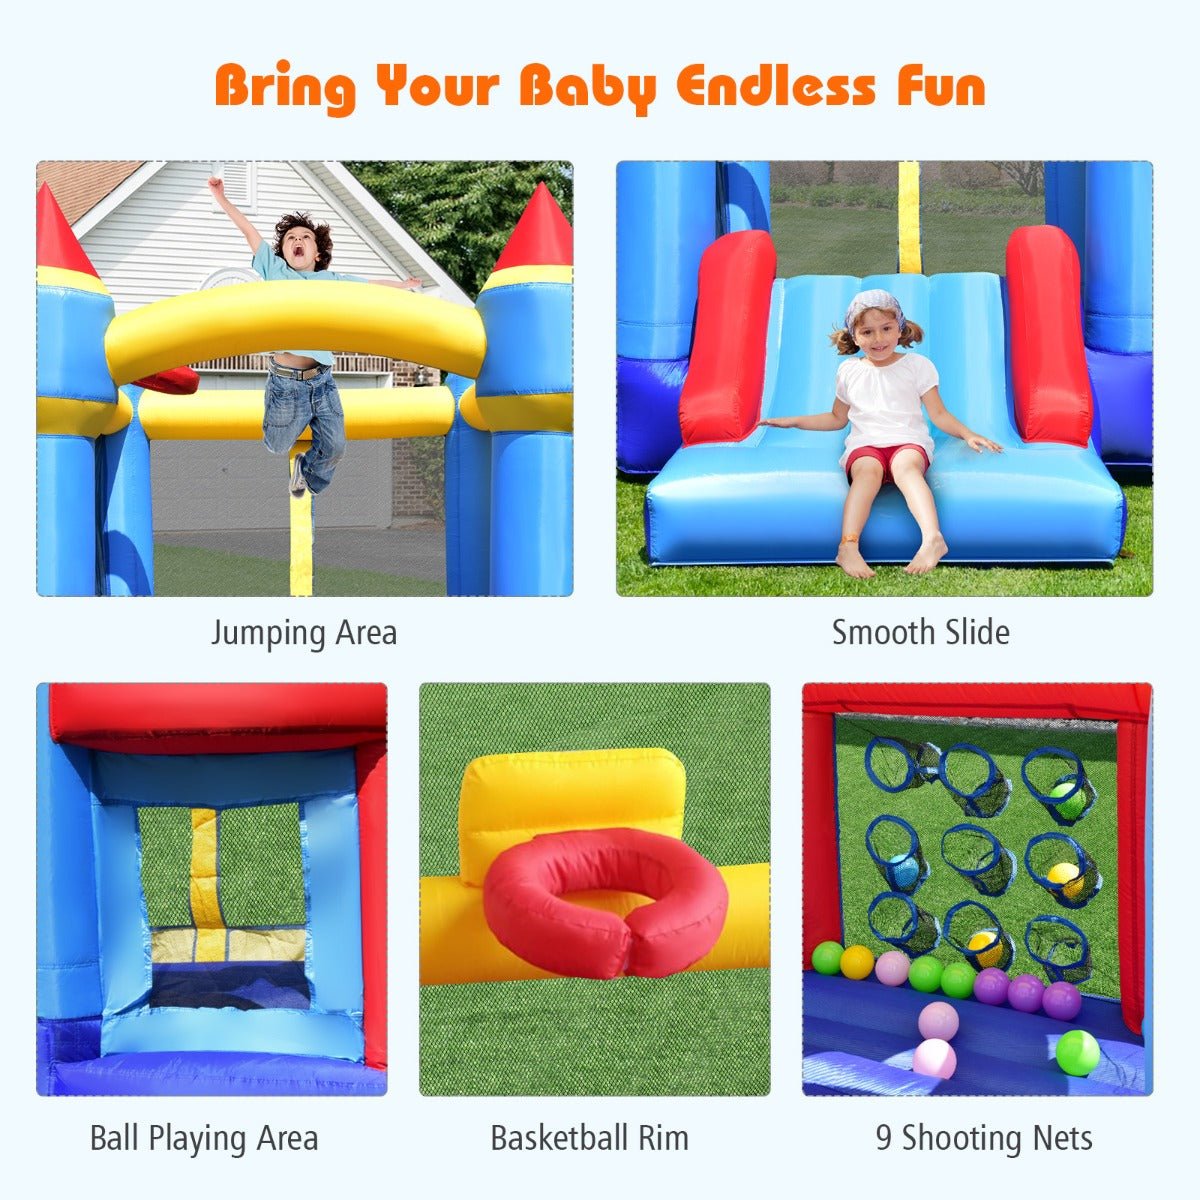 Joyful Moments: Inflatable Bounce House with Slide for Family Fun (Blower)